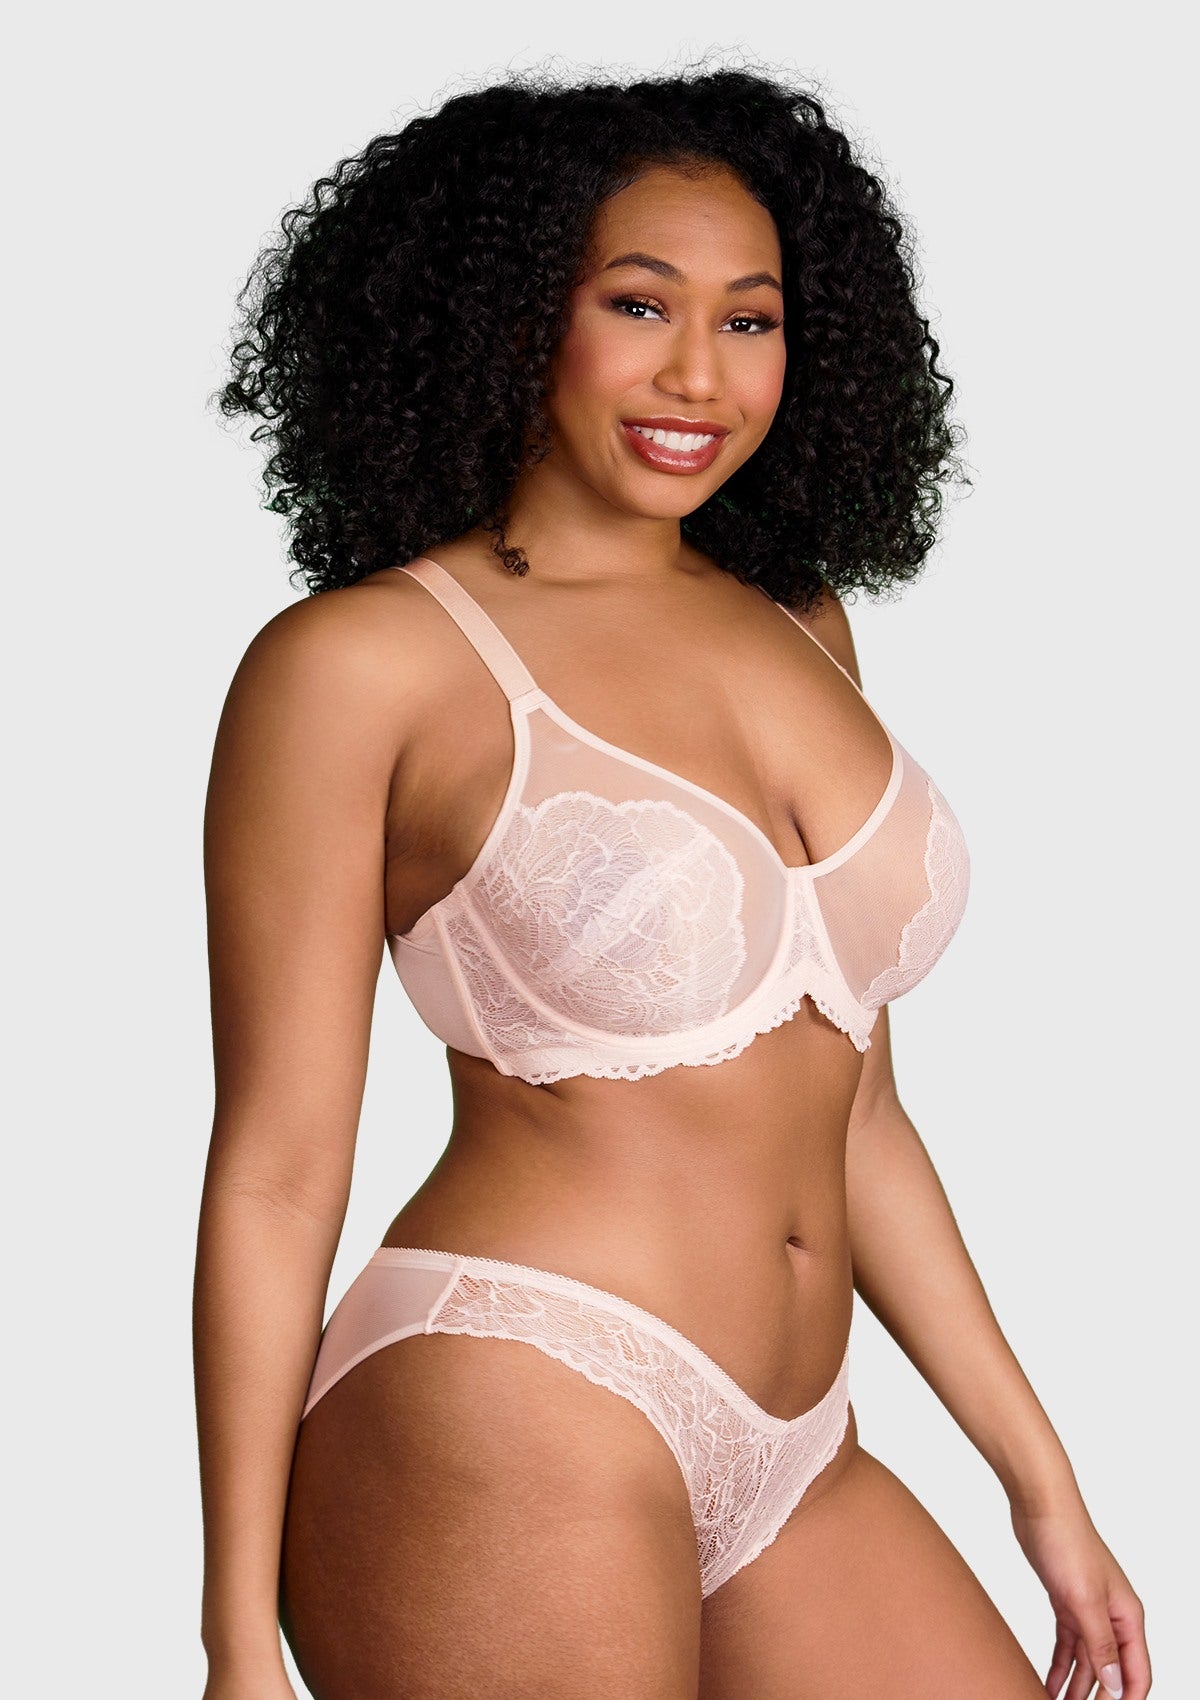 HSIA Blossom Sheer Lace Bra: Comfortable Underwire Bra For Big Busts - Dusty Peach / 36 / H